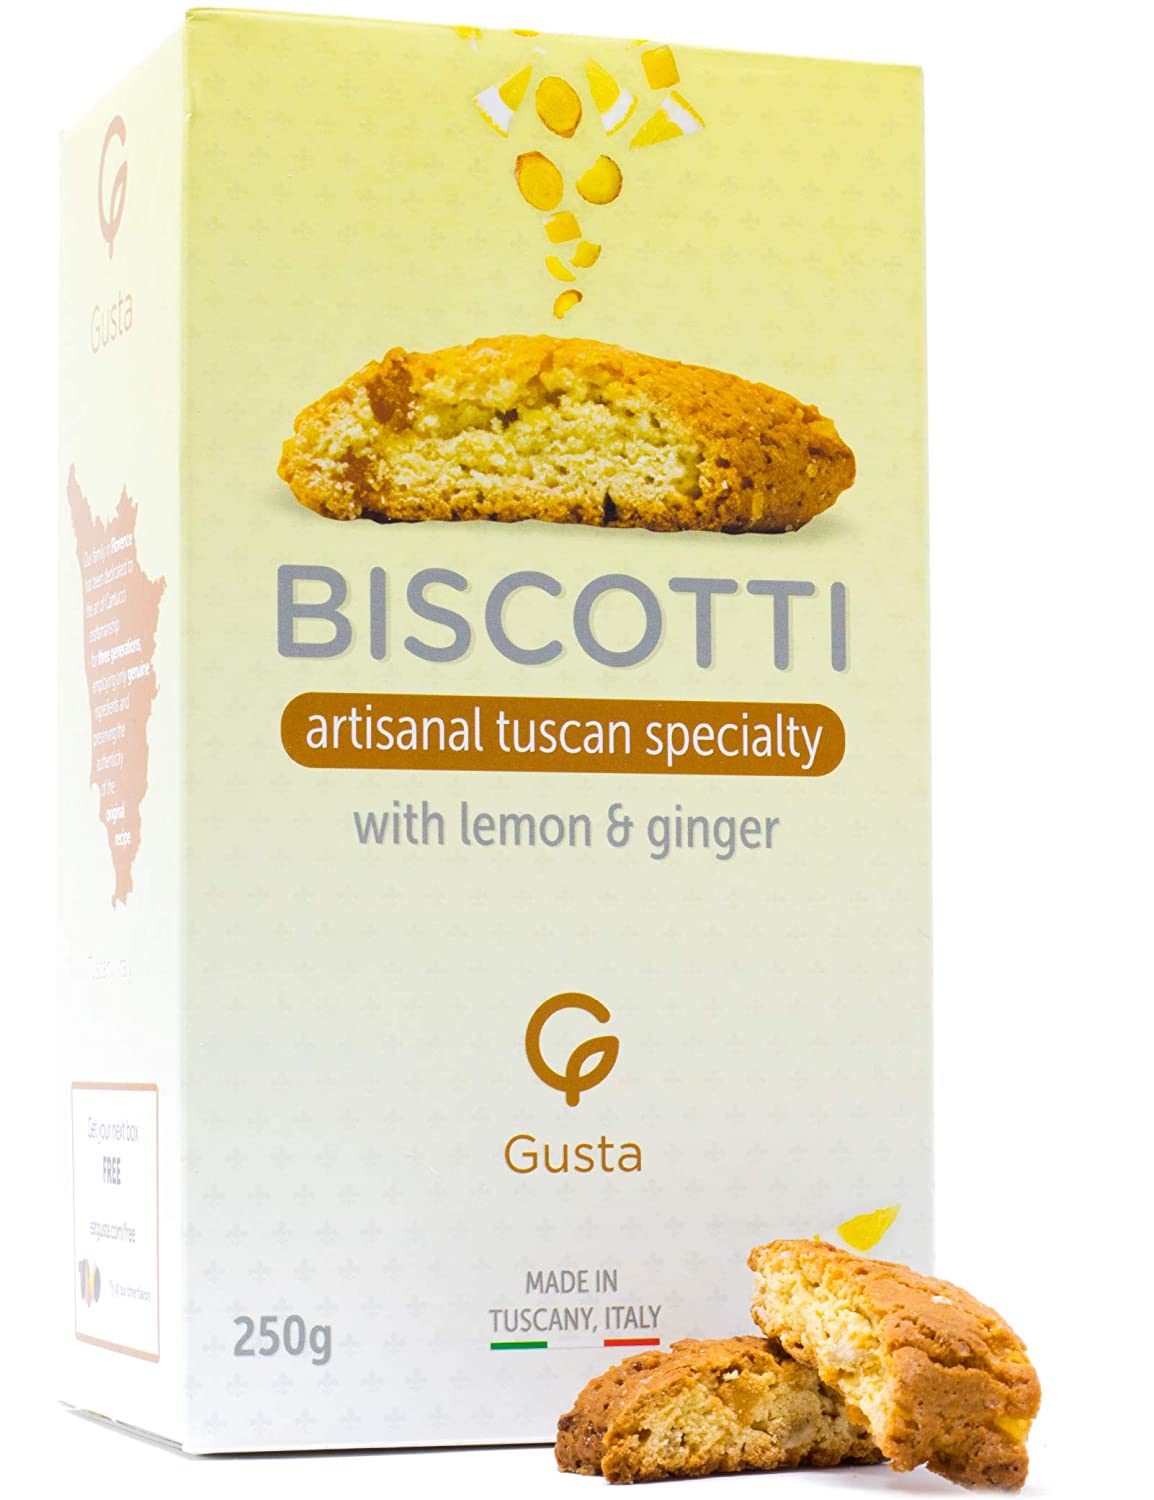 Gusta Authentic Biscotti Cookies Made in Tuscany, Italy - Variety-Pack (6 Boxes) 3.3 lbs